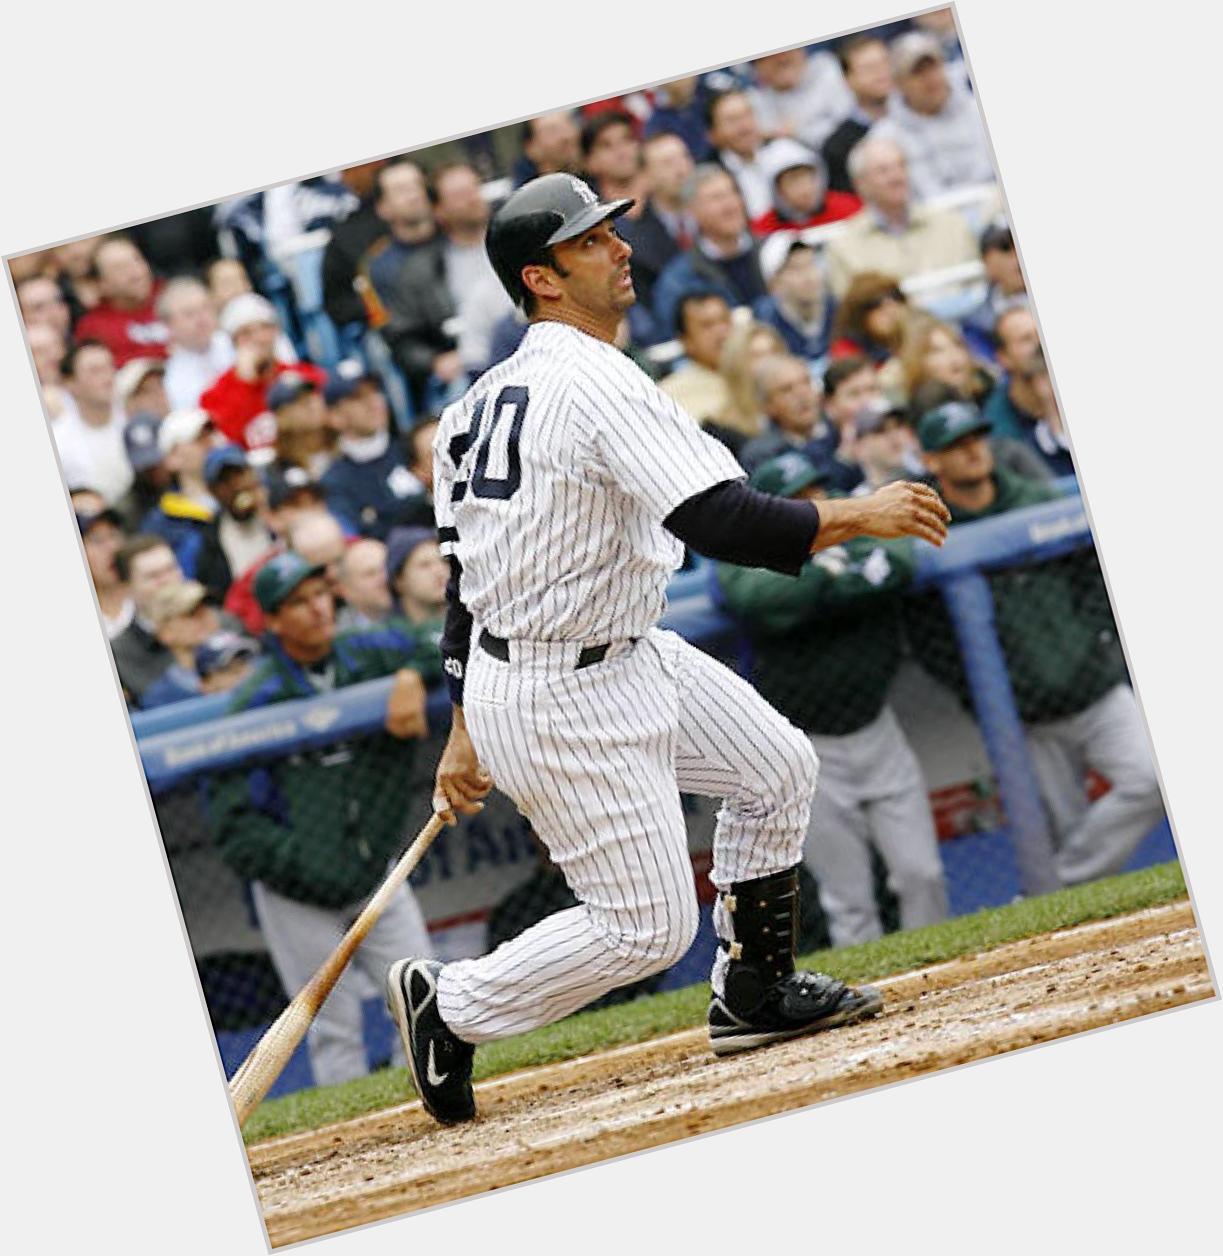 Happy Birthday to former Jorge Posada.  Loved watching you play. 